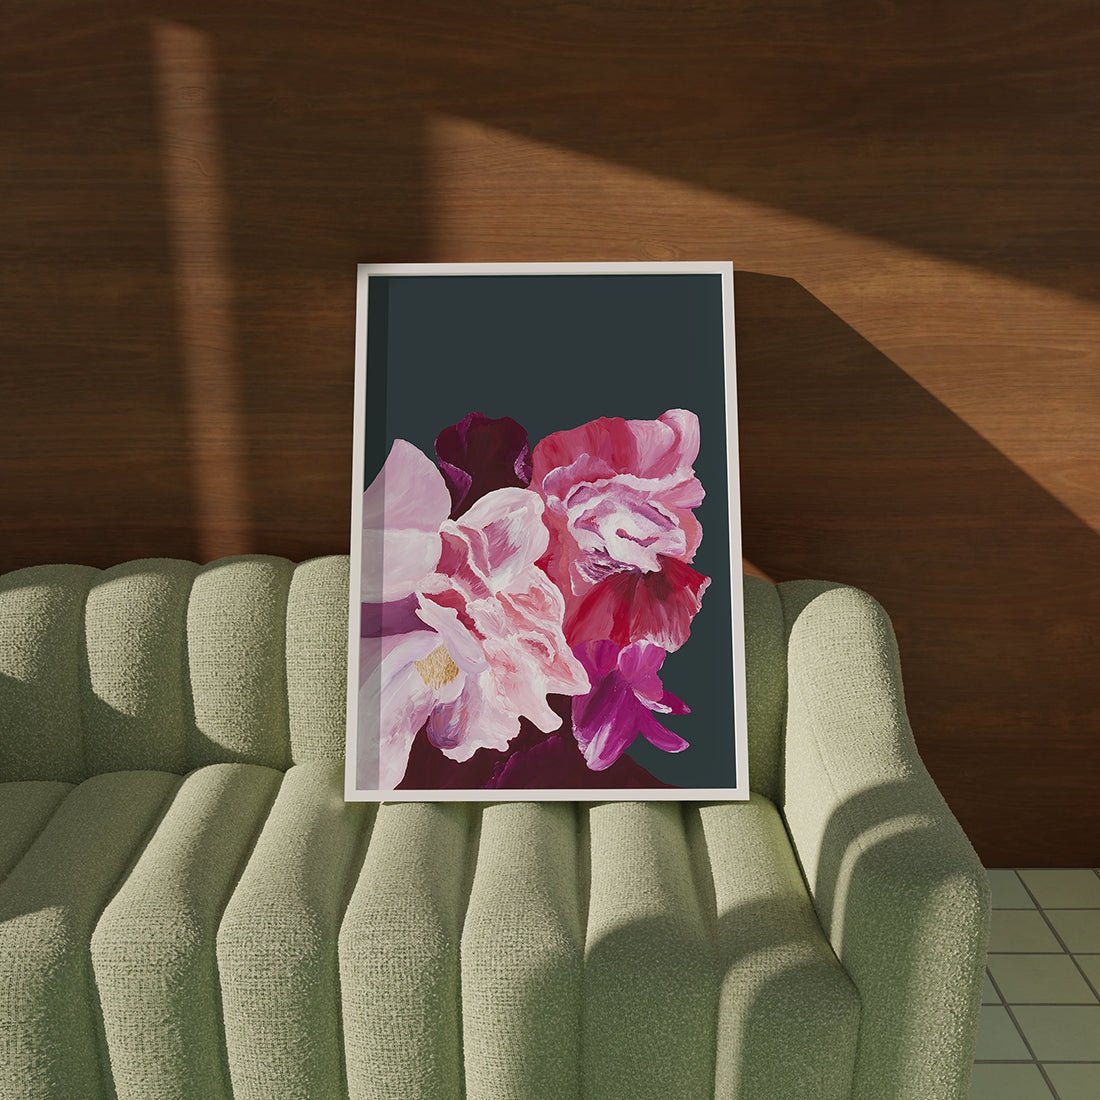 Balanced fine art print of pink flowers showcased on green couch.